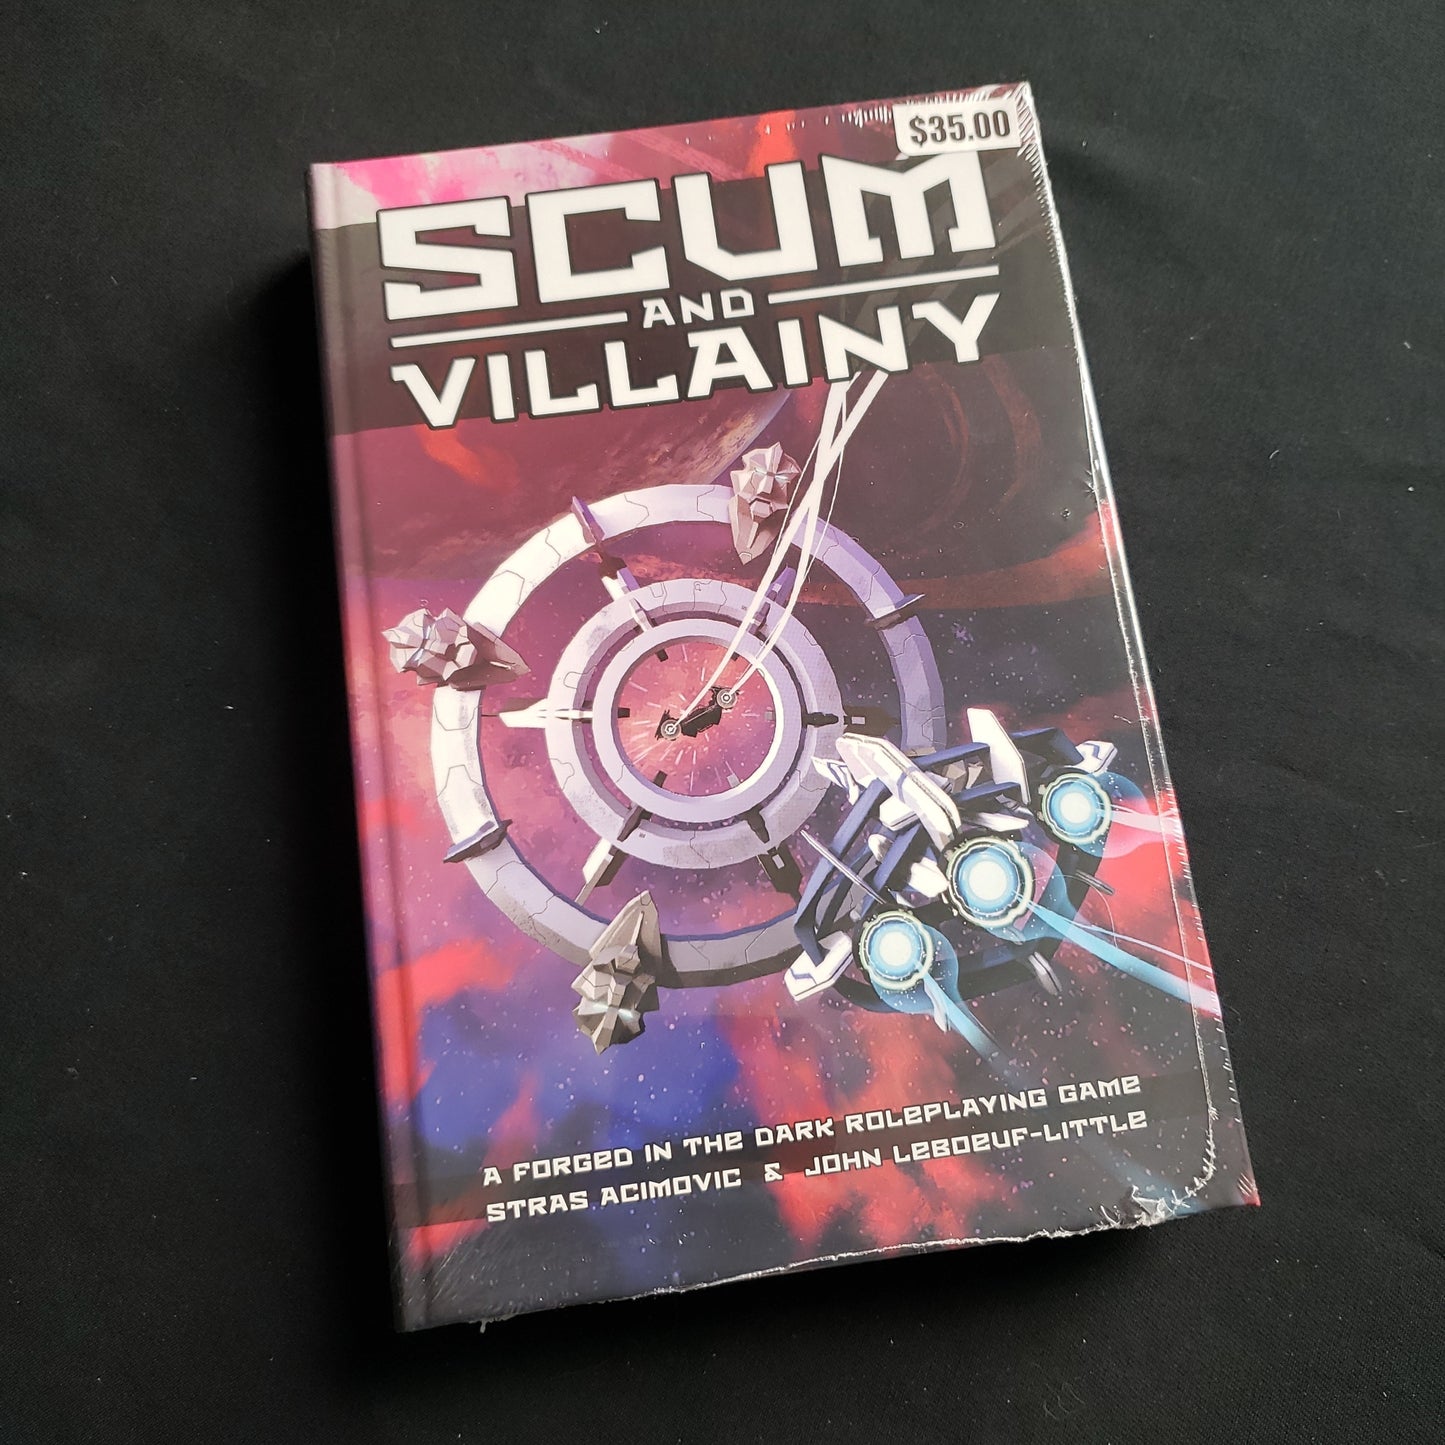 Image shows the front cover of the Scum & Villainy roleplaying game book